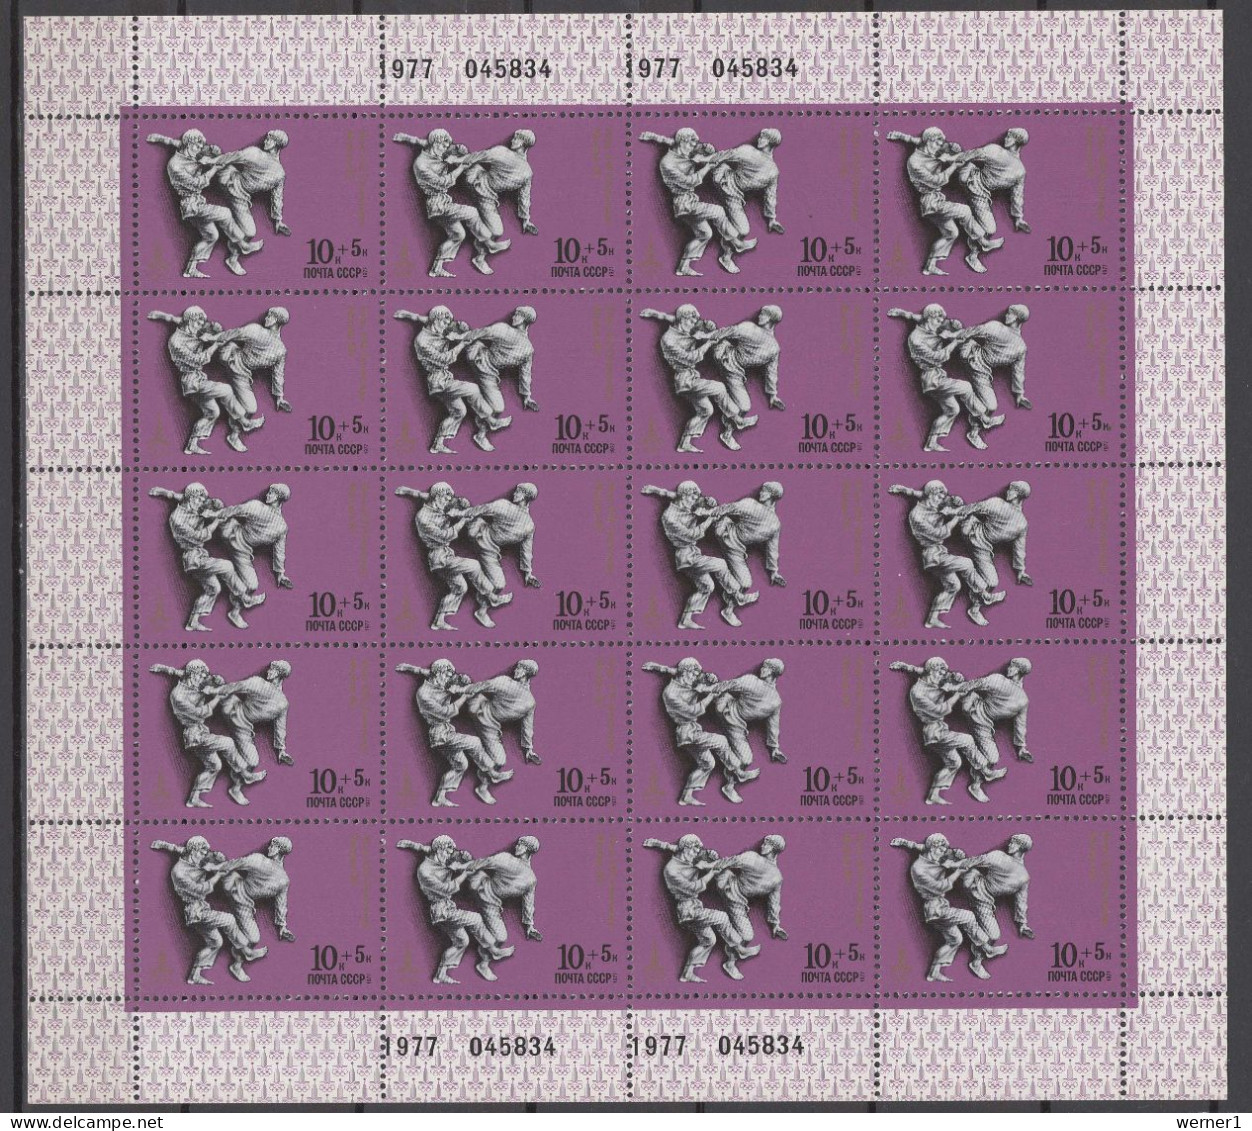 USSR Russia 1977 Olympic Games Moscow, Wrestling, Judo, Boxing, Weightlifting Set Of 5 Sheetlets MNH - Sommer 1980: Moskau